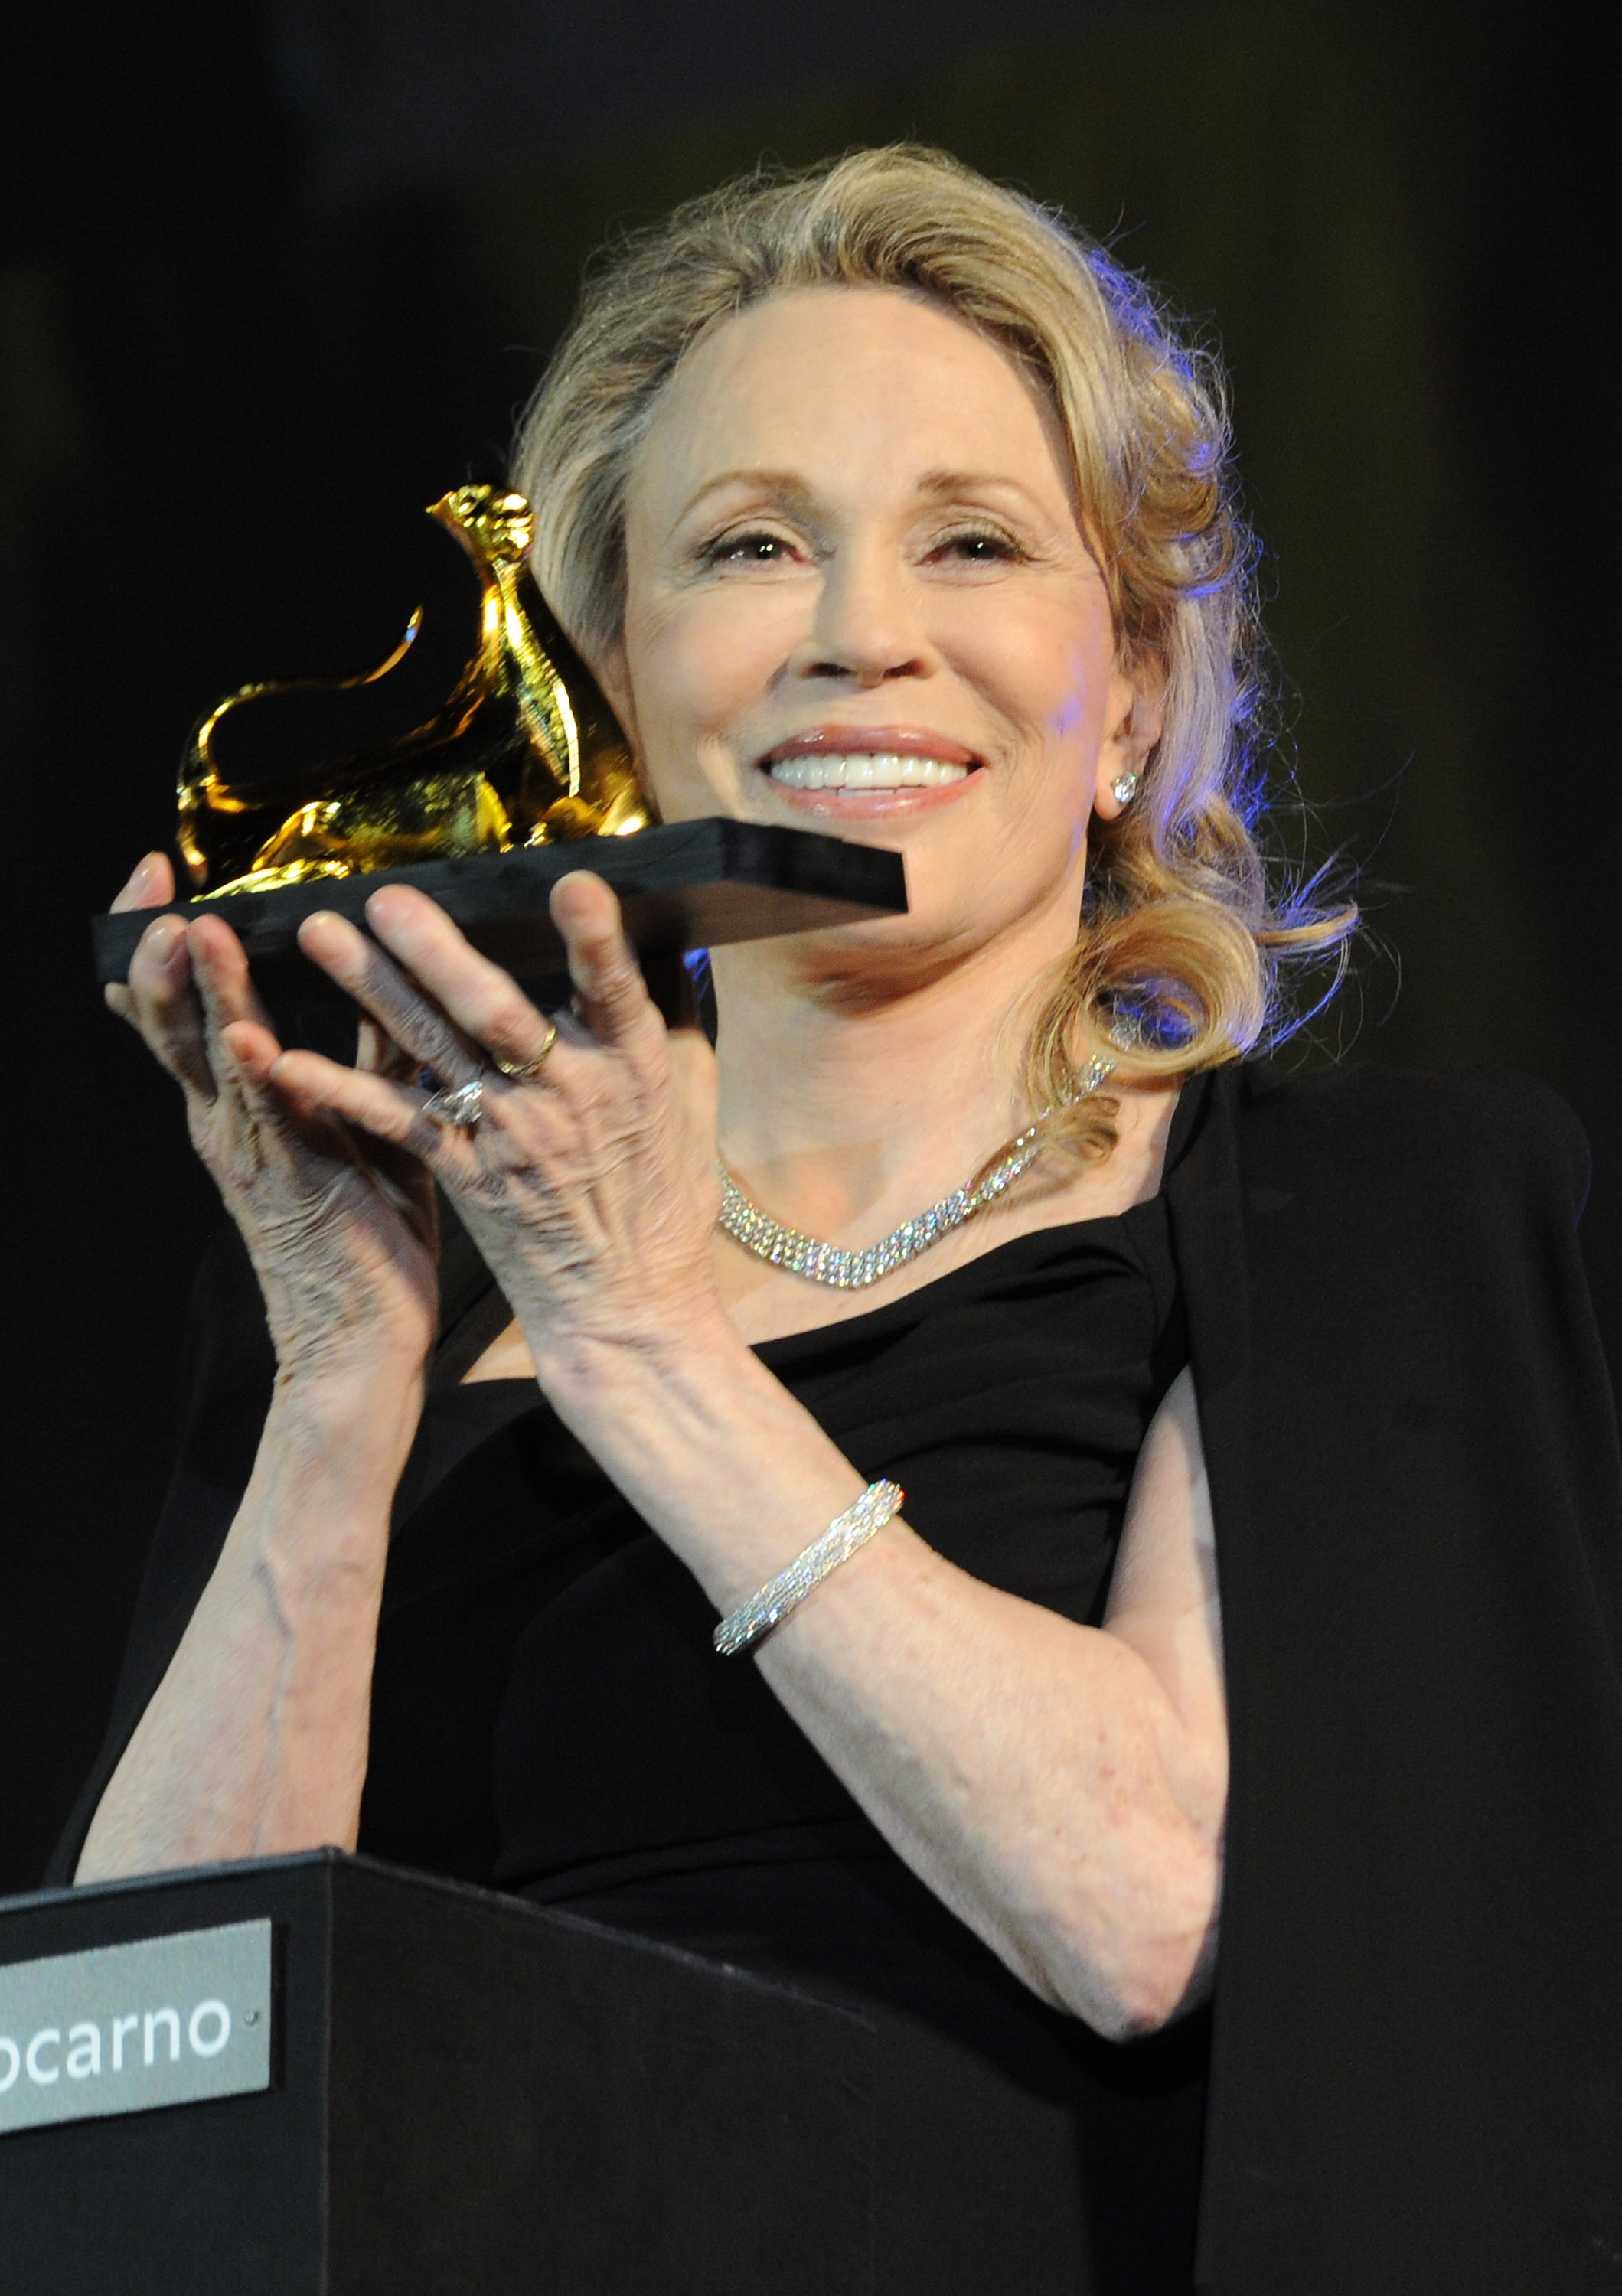 Faye Dunaway receiving the Leopard Club Award during the 66th Locarno Film Festival red carpet on August 9, 2013 in Locarno, Switzerland | Source: Getty Images